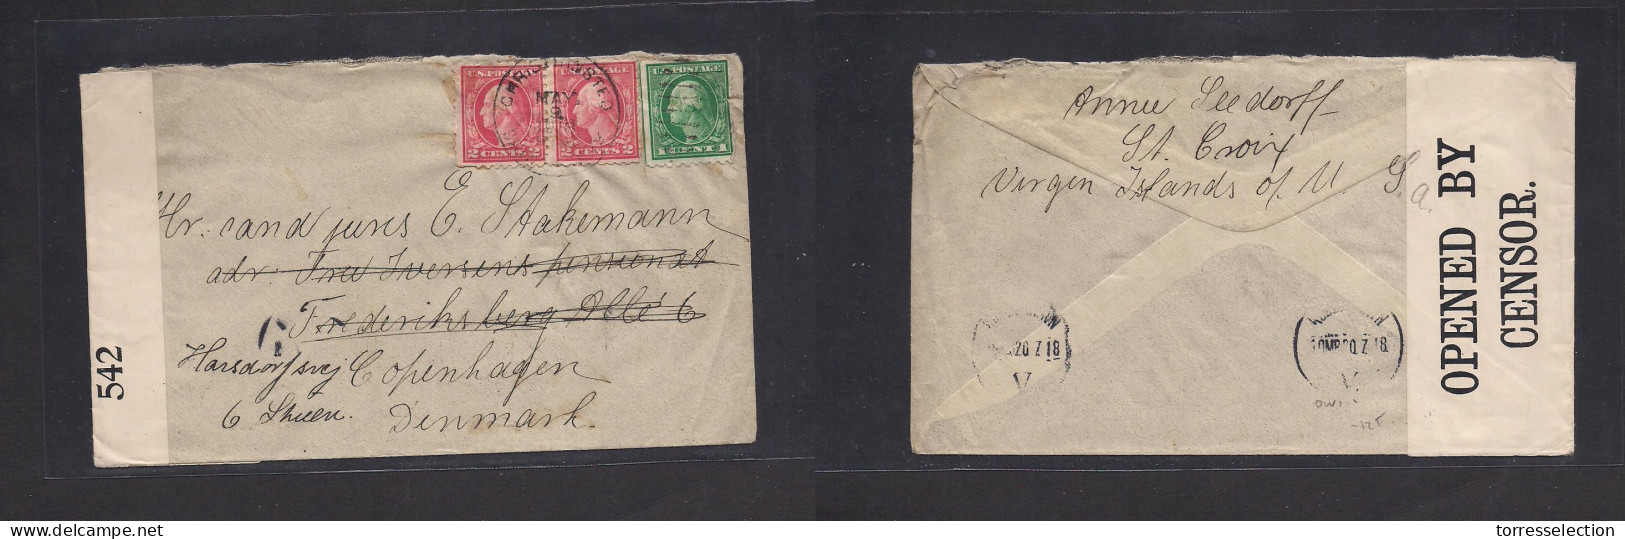 D.W.I.. 1918 (9 May) Christiansted - Denmark (20 July 18) Cph. Multifkd US WWI Censored Envelope. Fine. - West Indies